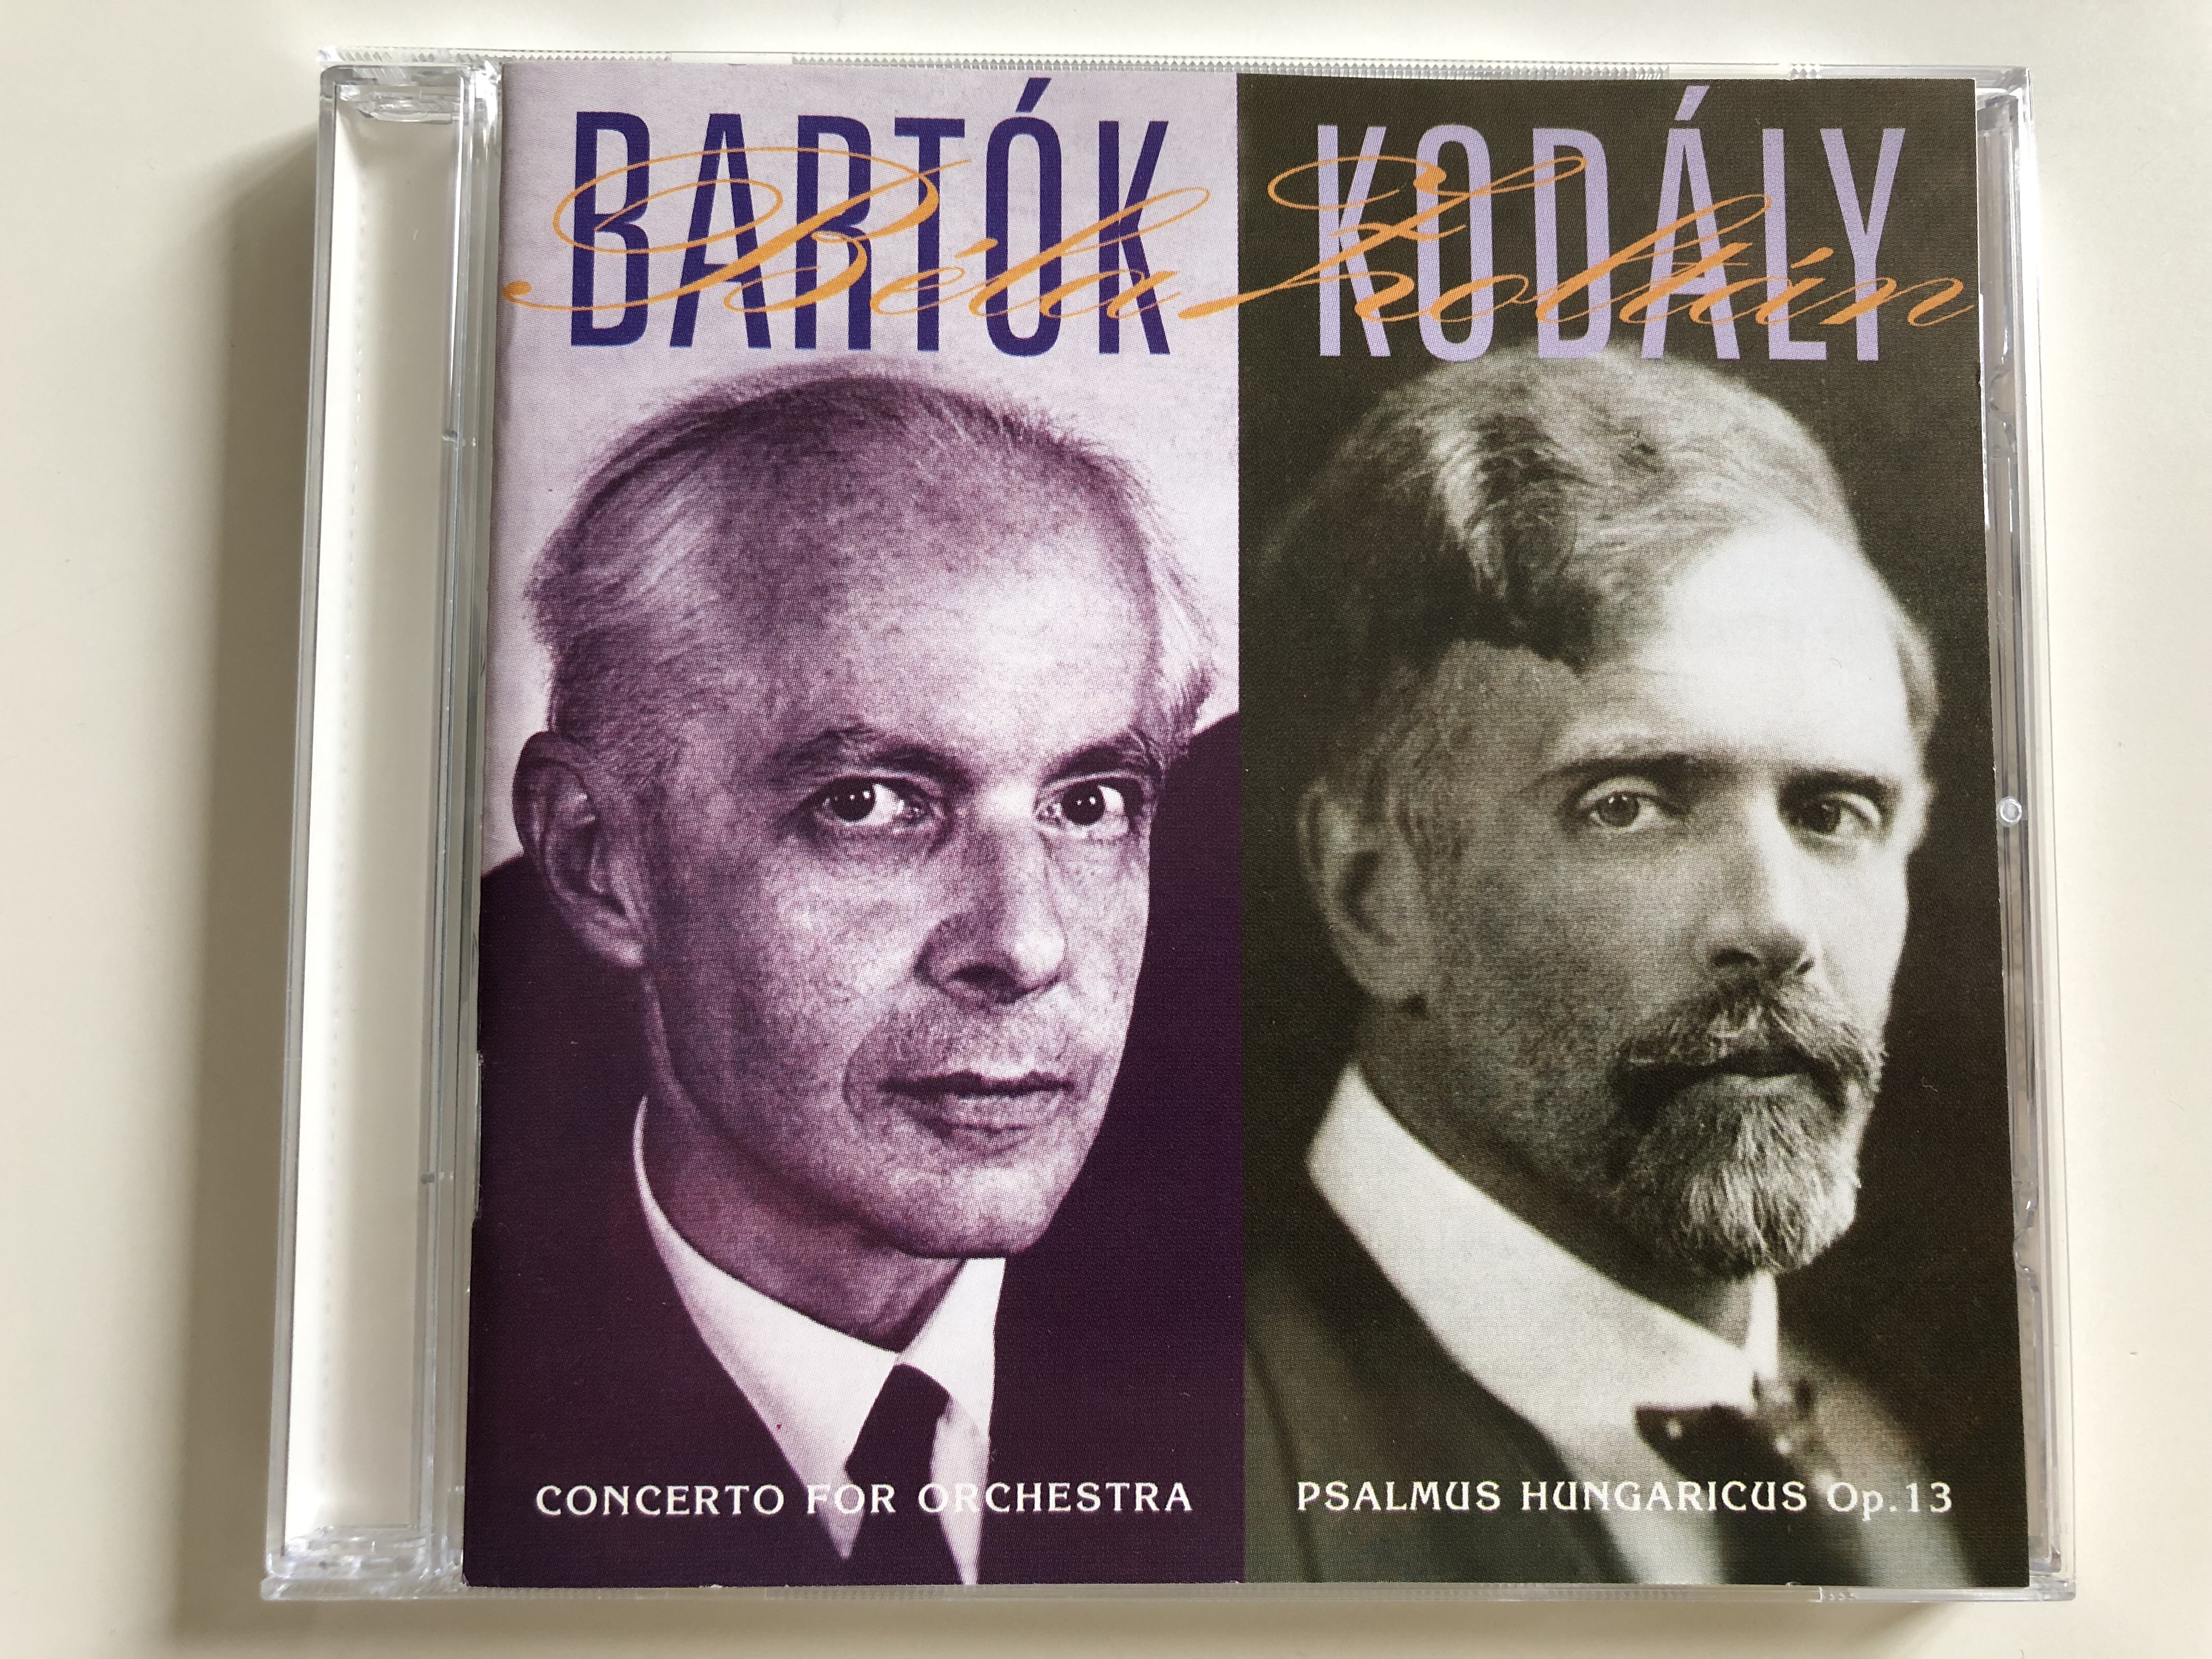 bart-k-b-la-concerto-for-orchestra-kod-ly-zolt-n-psalmus-hungaricus-op.-13-hungarian-radio-and-tv-symphonic-orchestra-cond.-tam-s-v-s-ry-audio-cd-1-.jpg